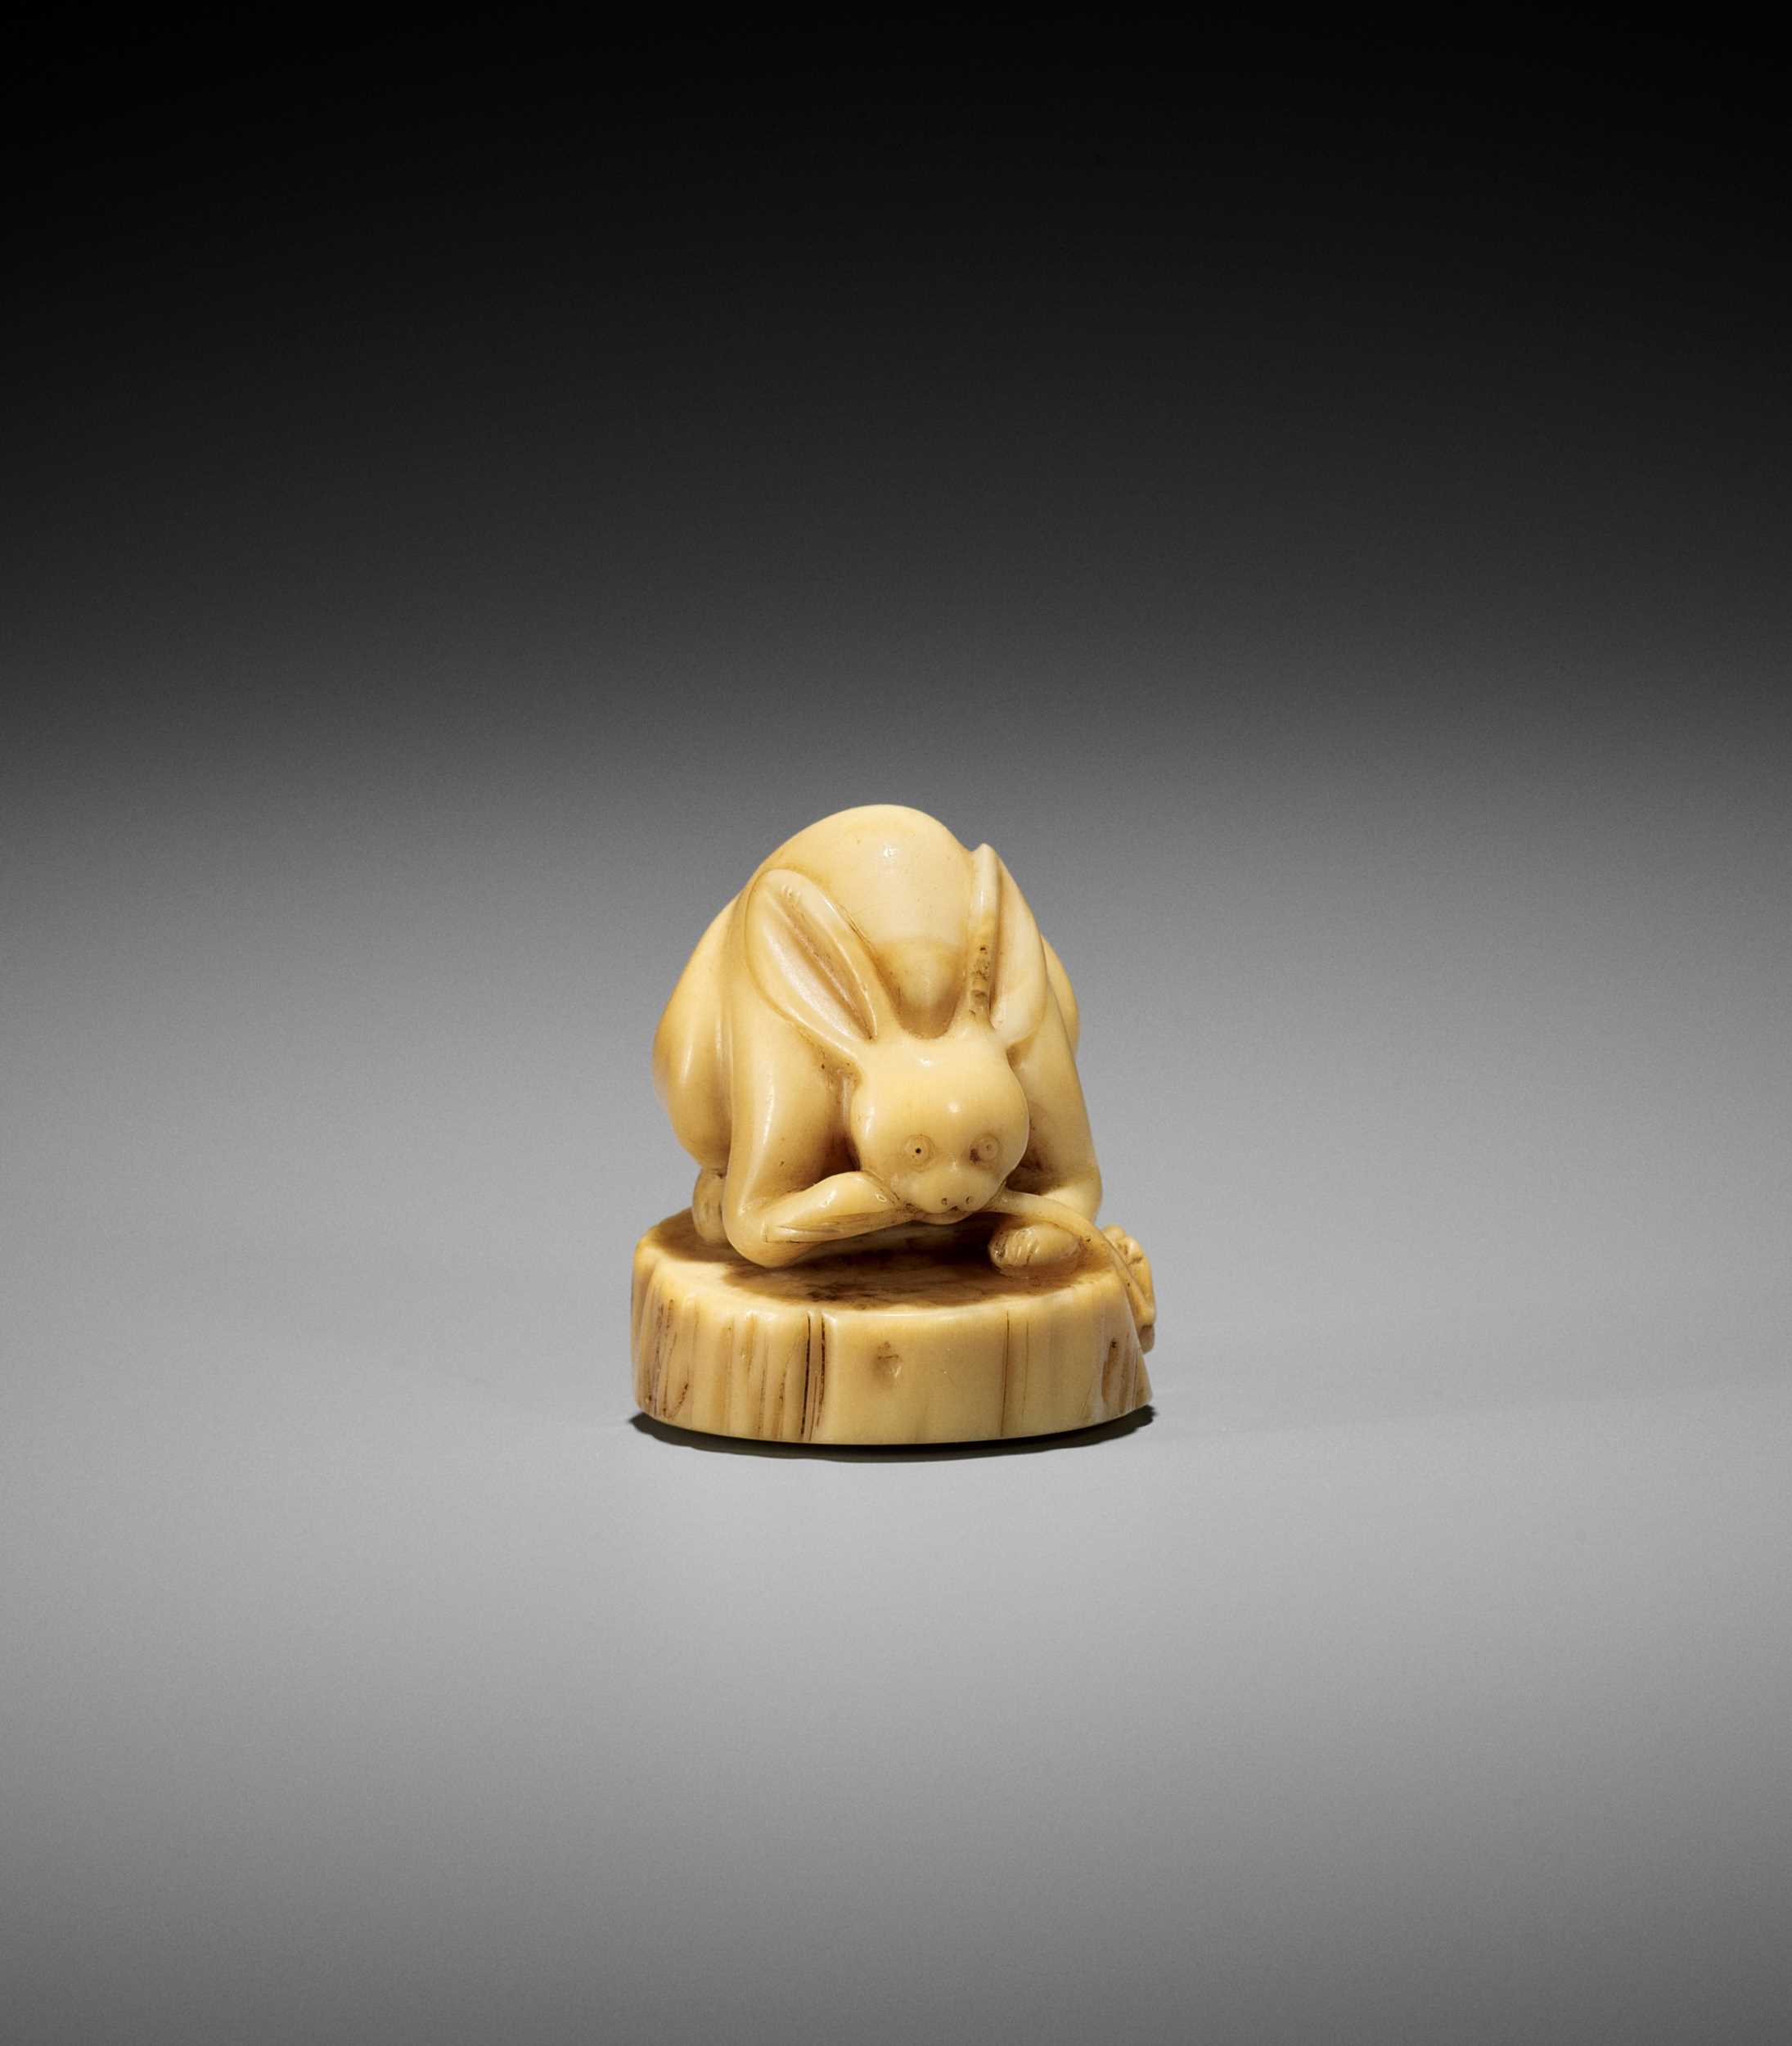 A VERY RARE NARWHAL TUSK NETSUKE OF A RABBIT WITH REISHI